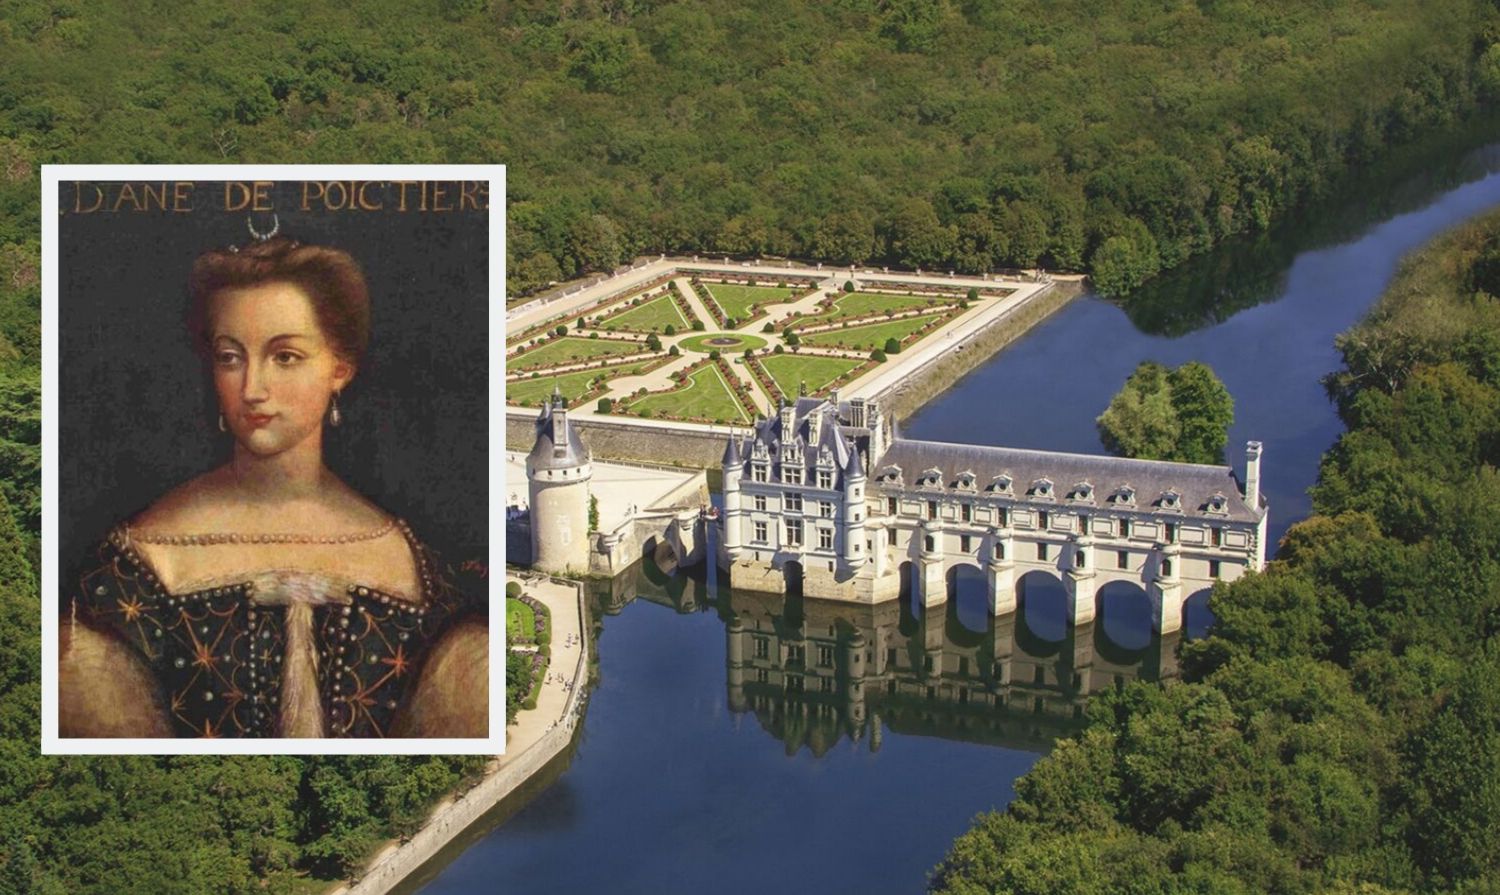 In The Footsteps Of Diane De Poitiers At Chateau De Chenonceau